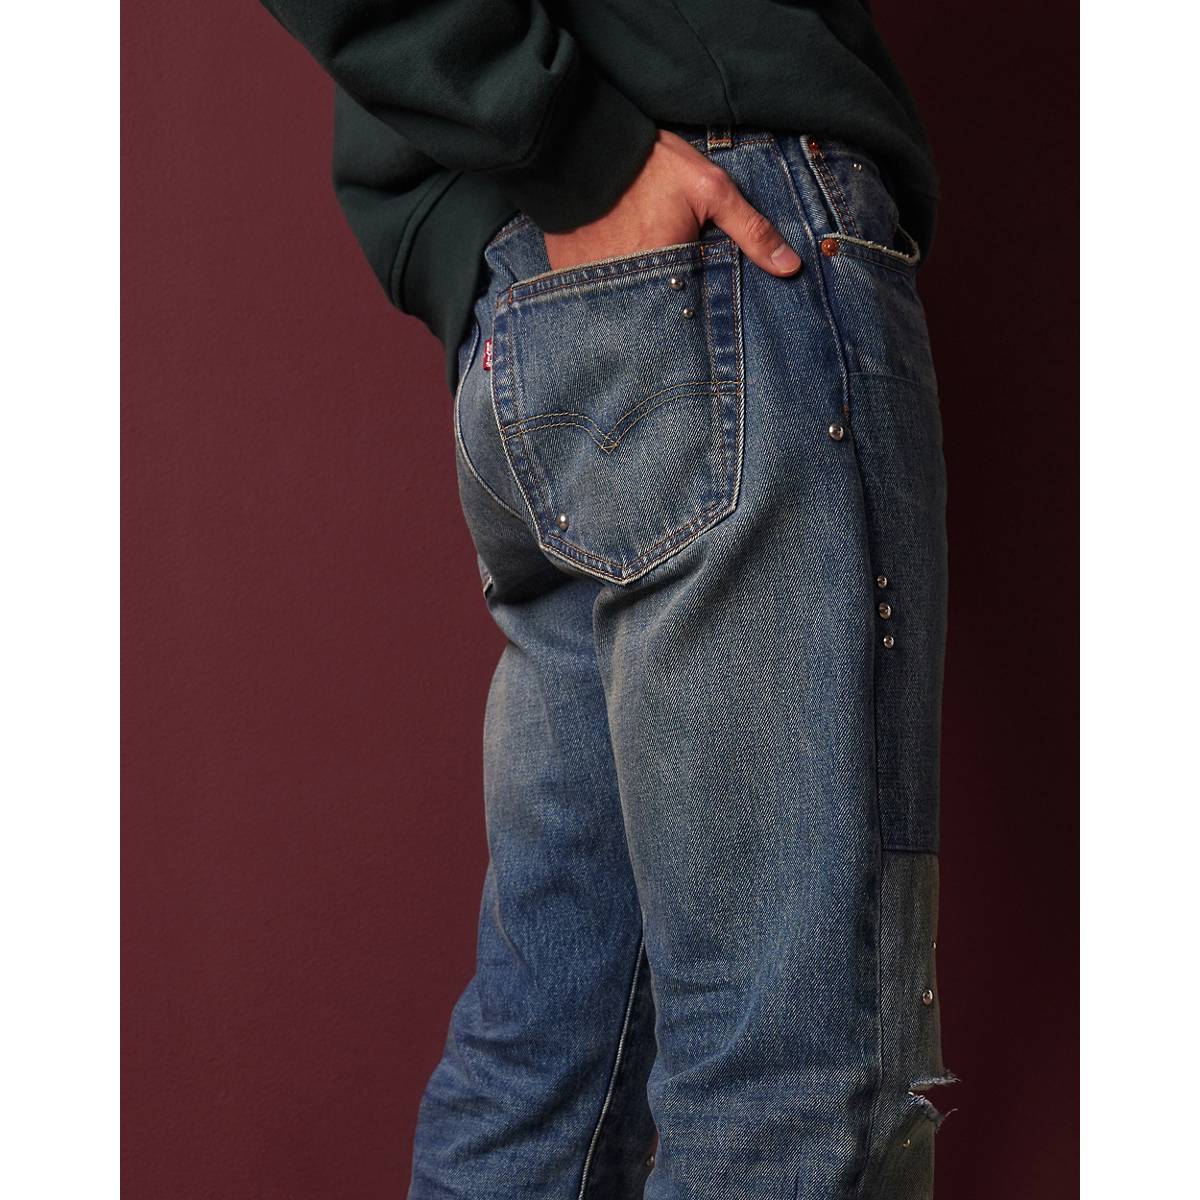 Man wearing jeans behind white wall